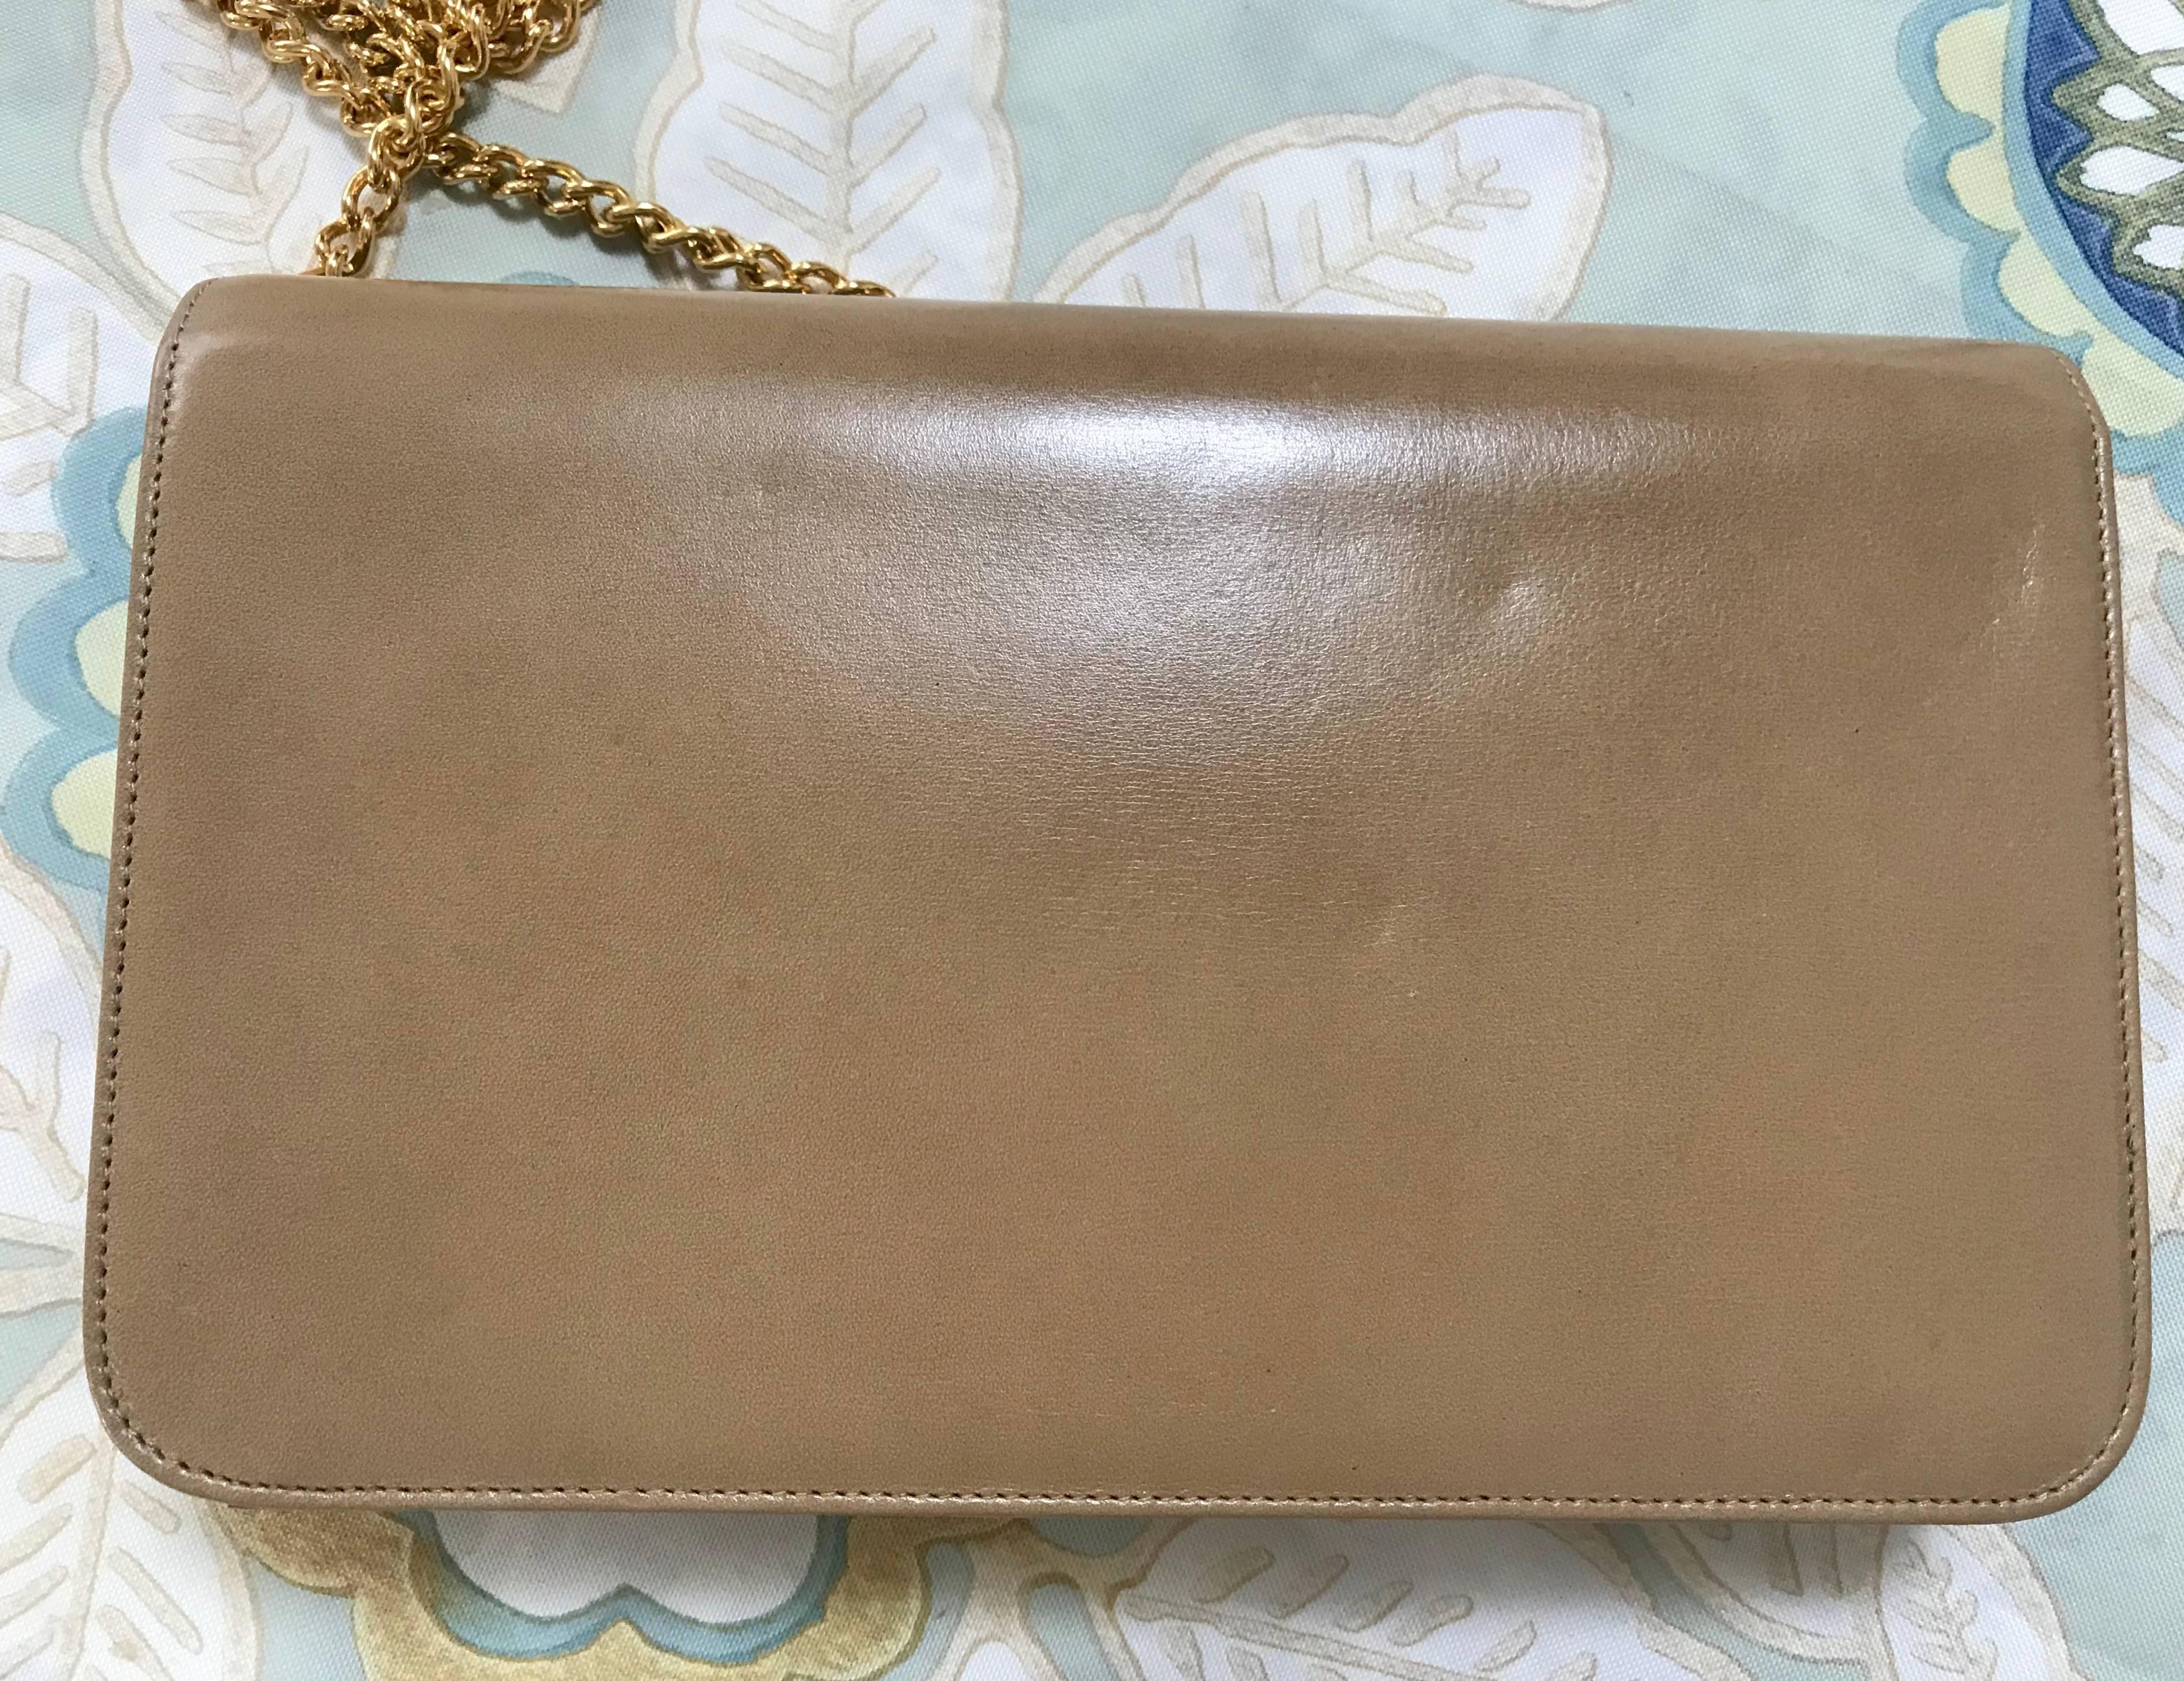 Beige NEW with tag, MINT. Vintage Nina Ricci beige clutch shoulder bag with bow stitch For Sale